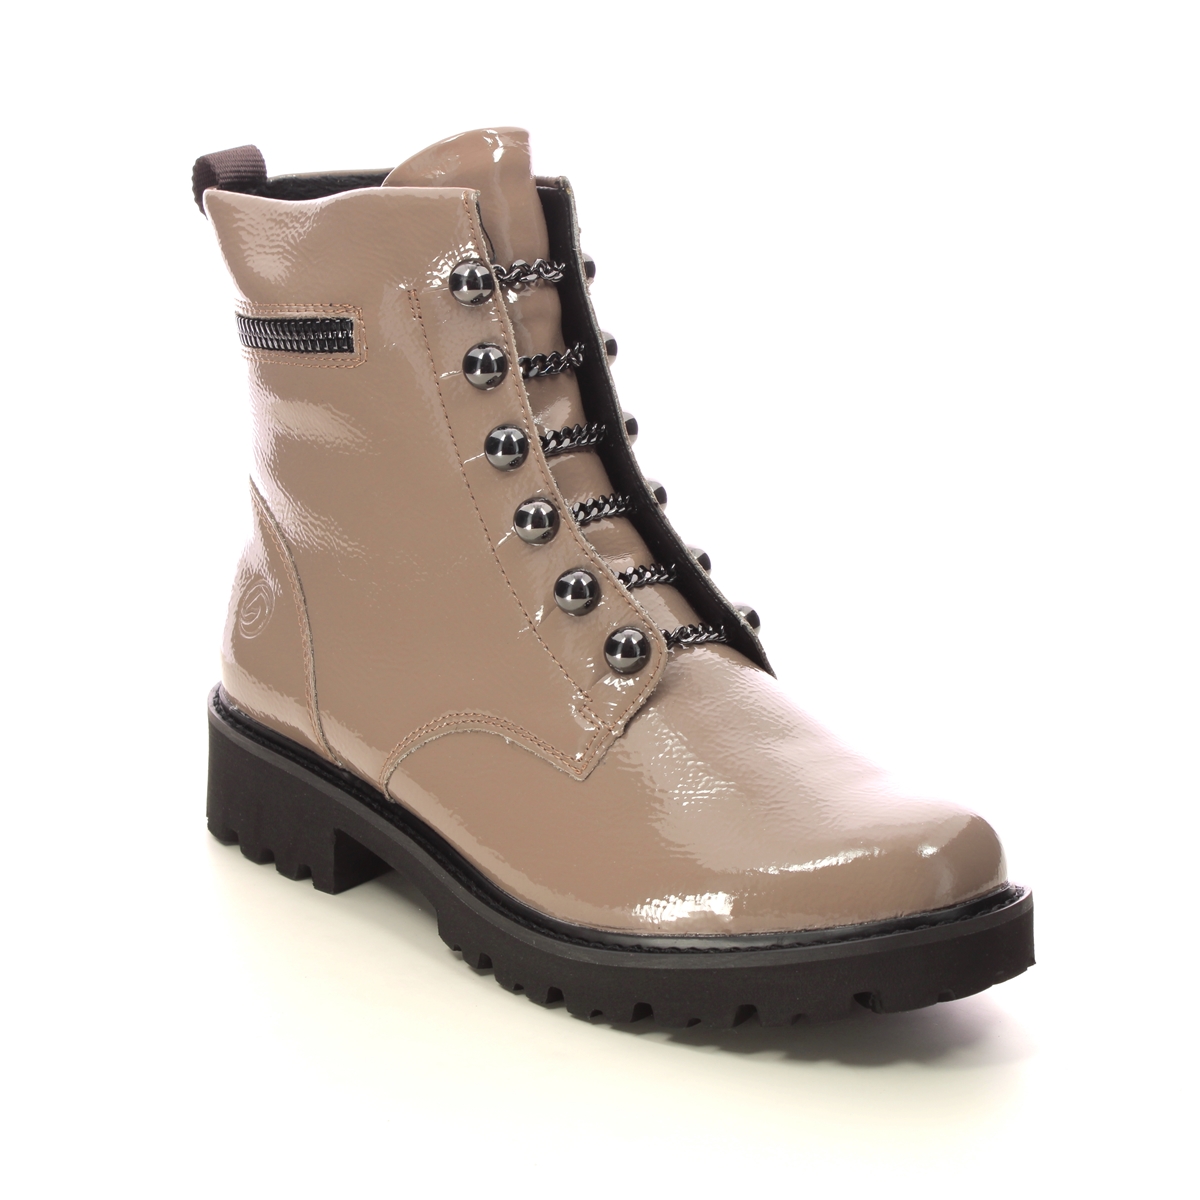 Remonte Docland Taupe Patent Womens Biker Boots D8670-20 In Size 39 In Plain Taupe Patent